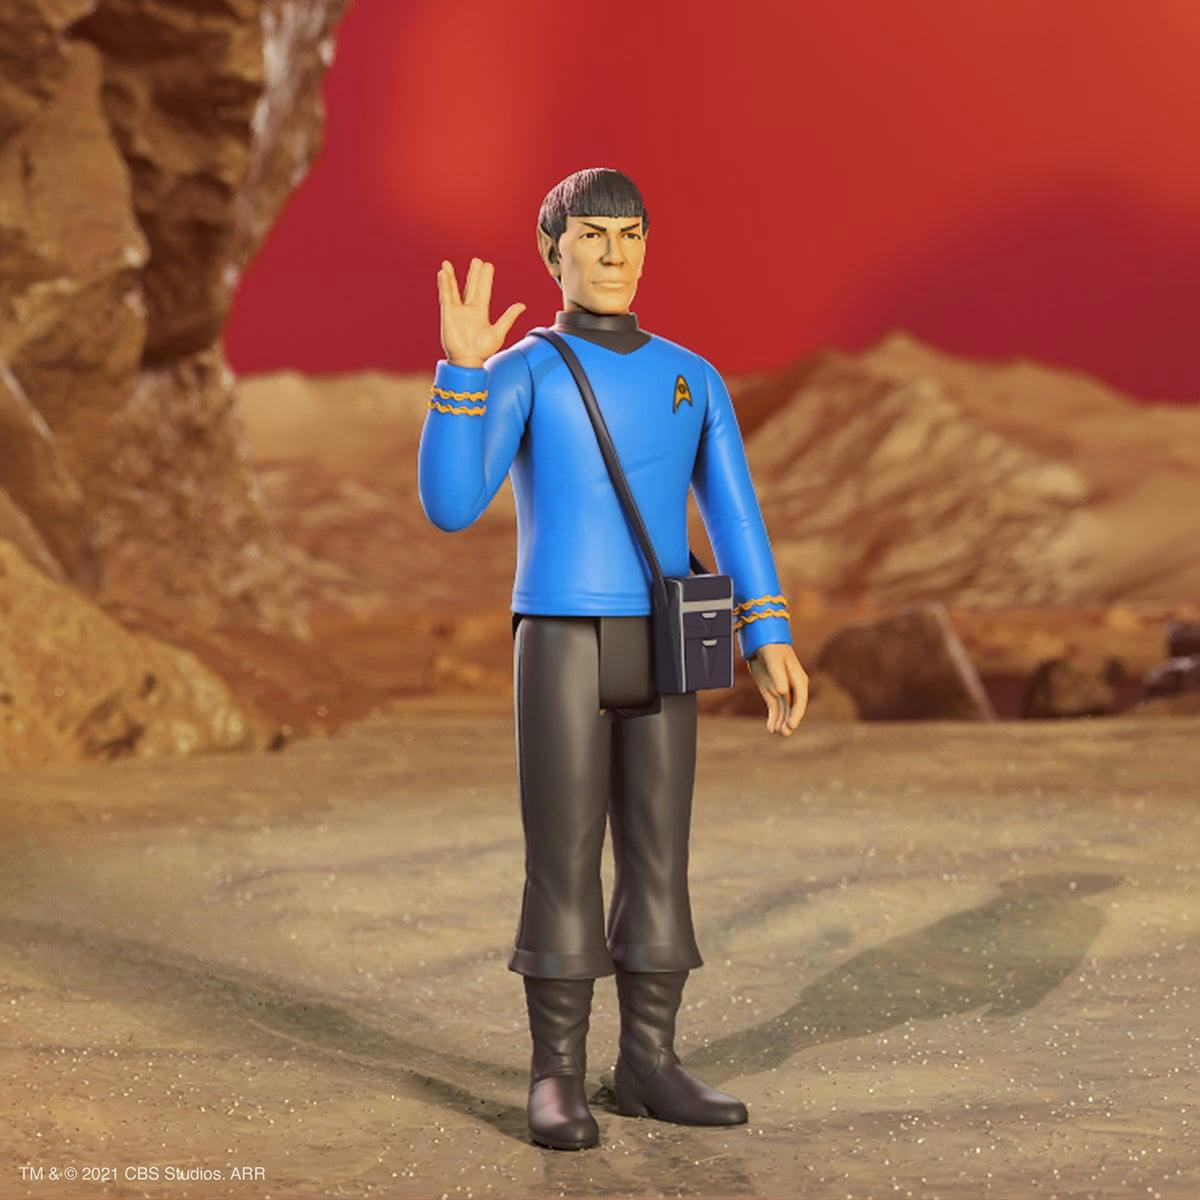 The Star Trek 2021 Holiday Gift Guide